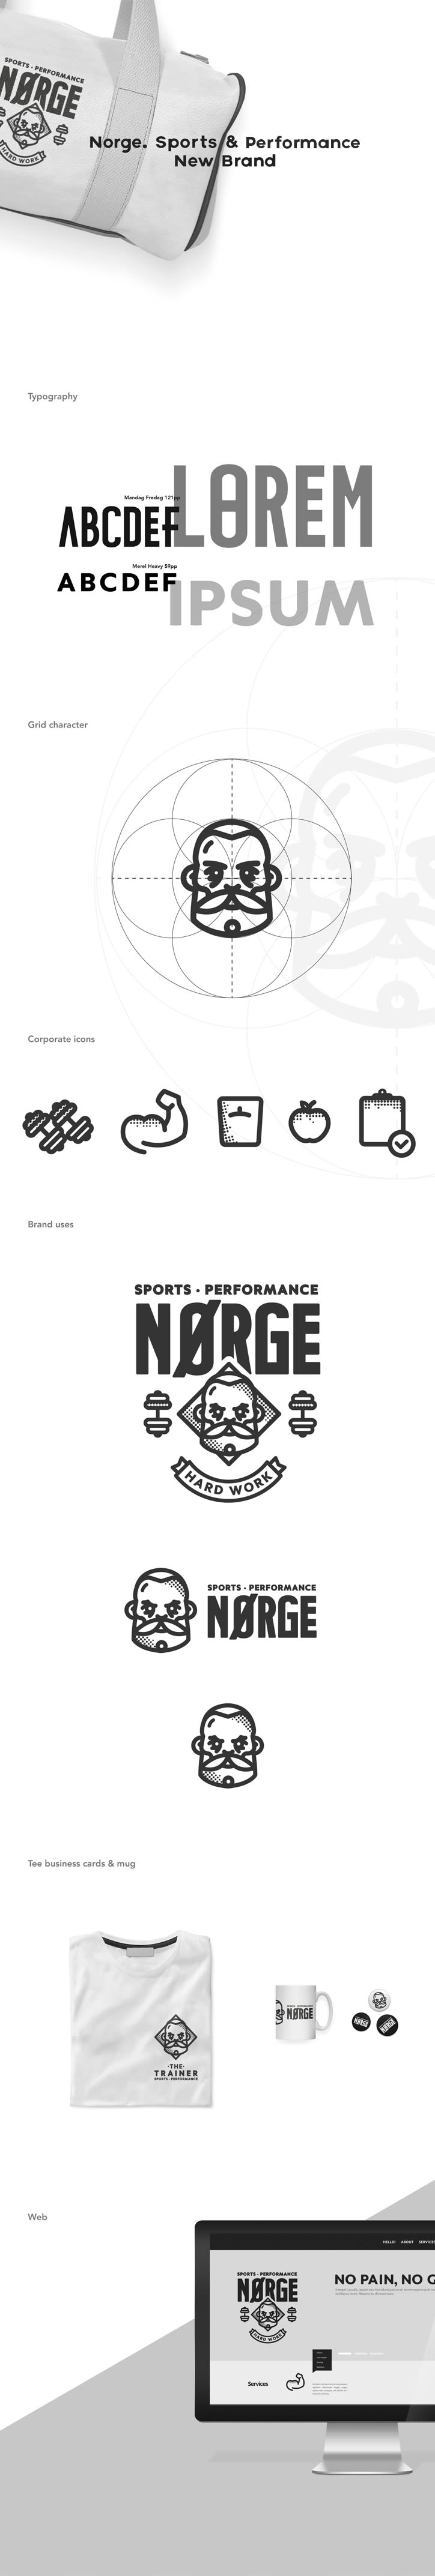 Norge. Sports & Performance 1